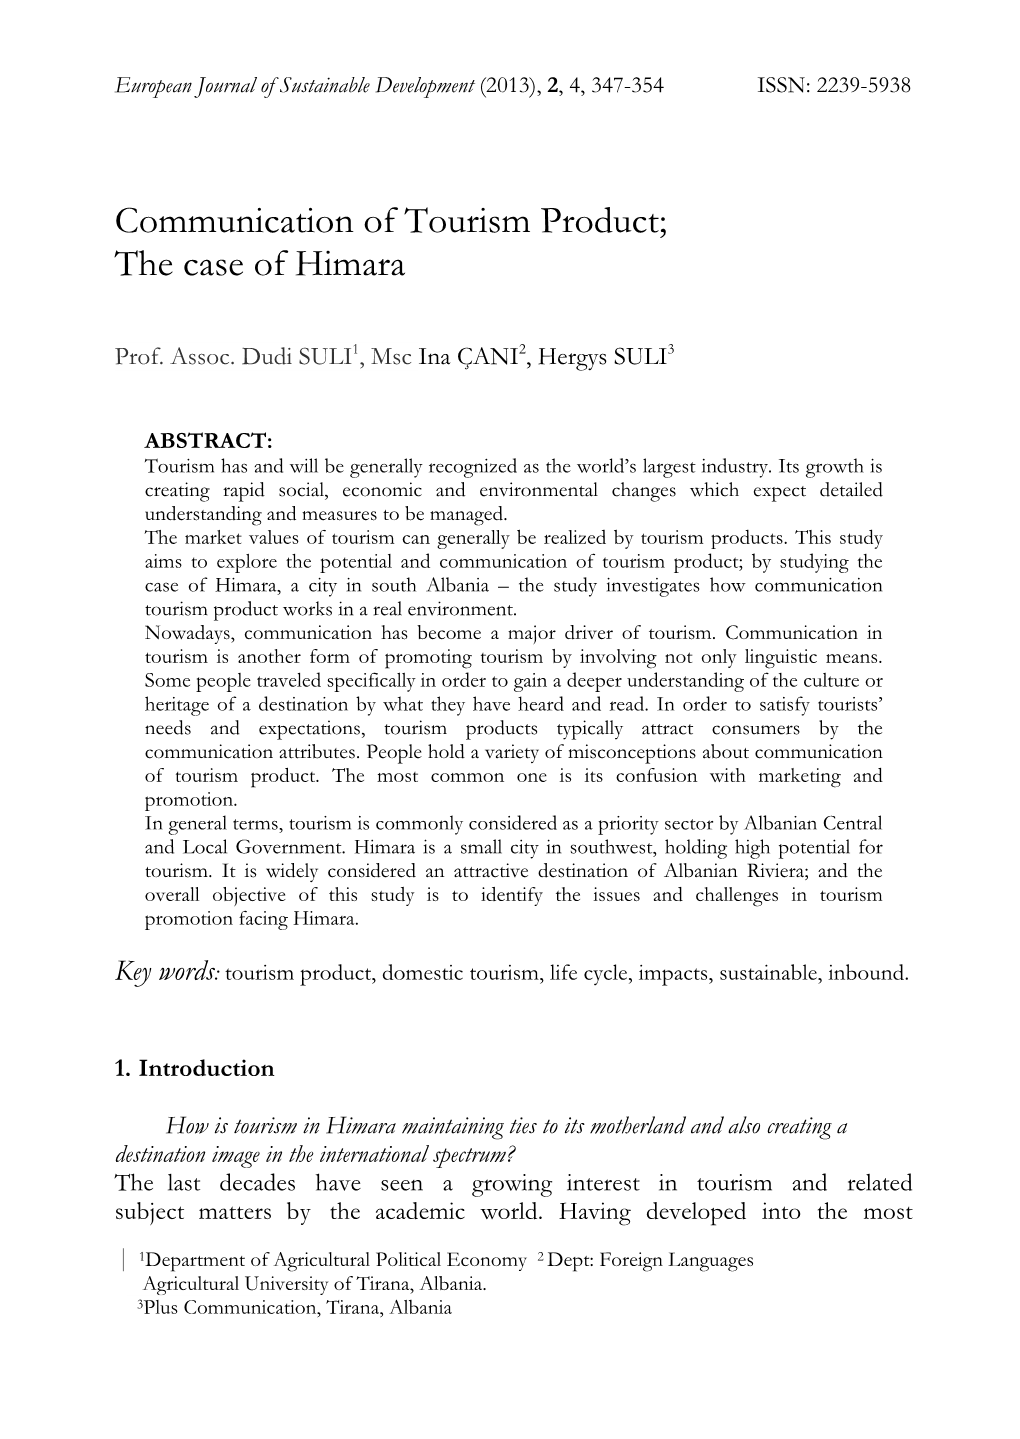 Communication of Tourism Product; the Case of Himara